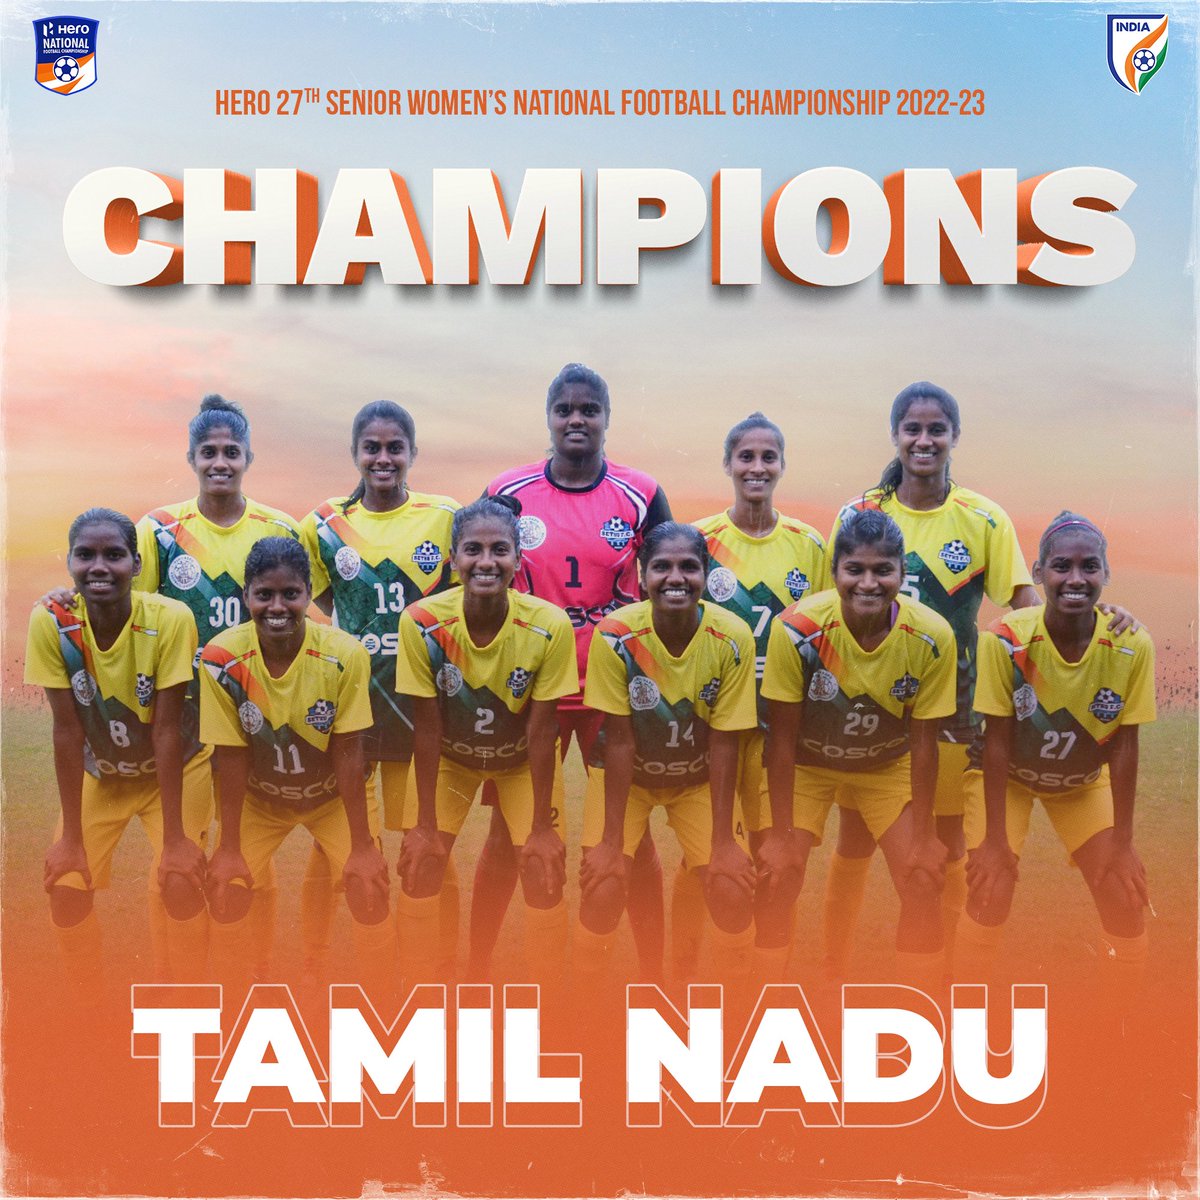 🏆 TAMIL NADU ARE THE CHAMPIONS 🏆

A supreme comeback sees them clinch their 2️⃣nd title in the Hero Sr Women's NFC 👏👏👏

TN 2️⃣-1️⃣ HRY

#TNHRY ⚔️ #HeroSrWNFC 🏆 #IndianFootball ⚽